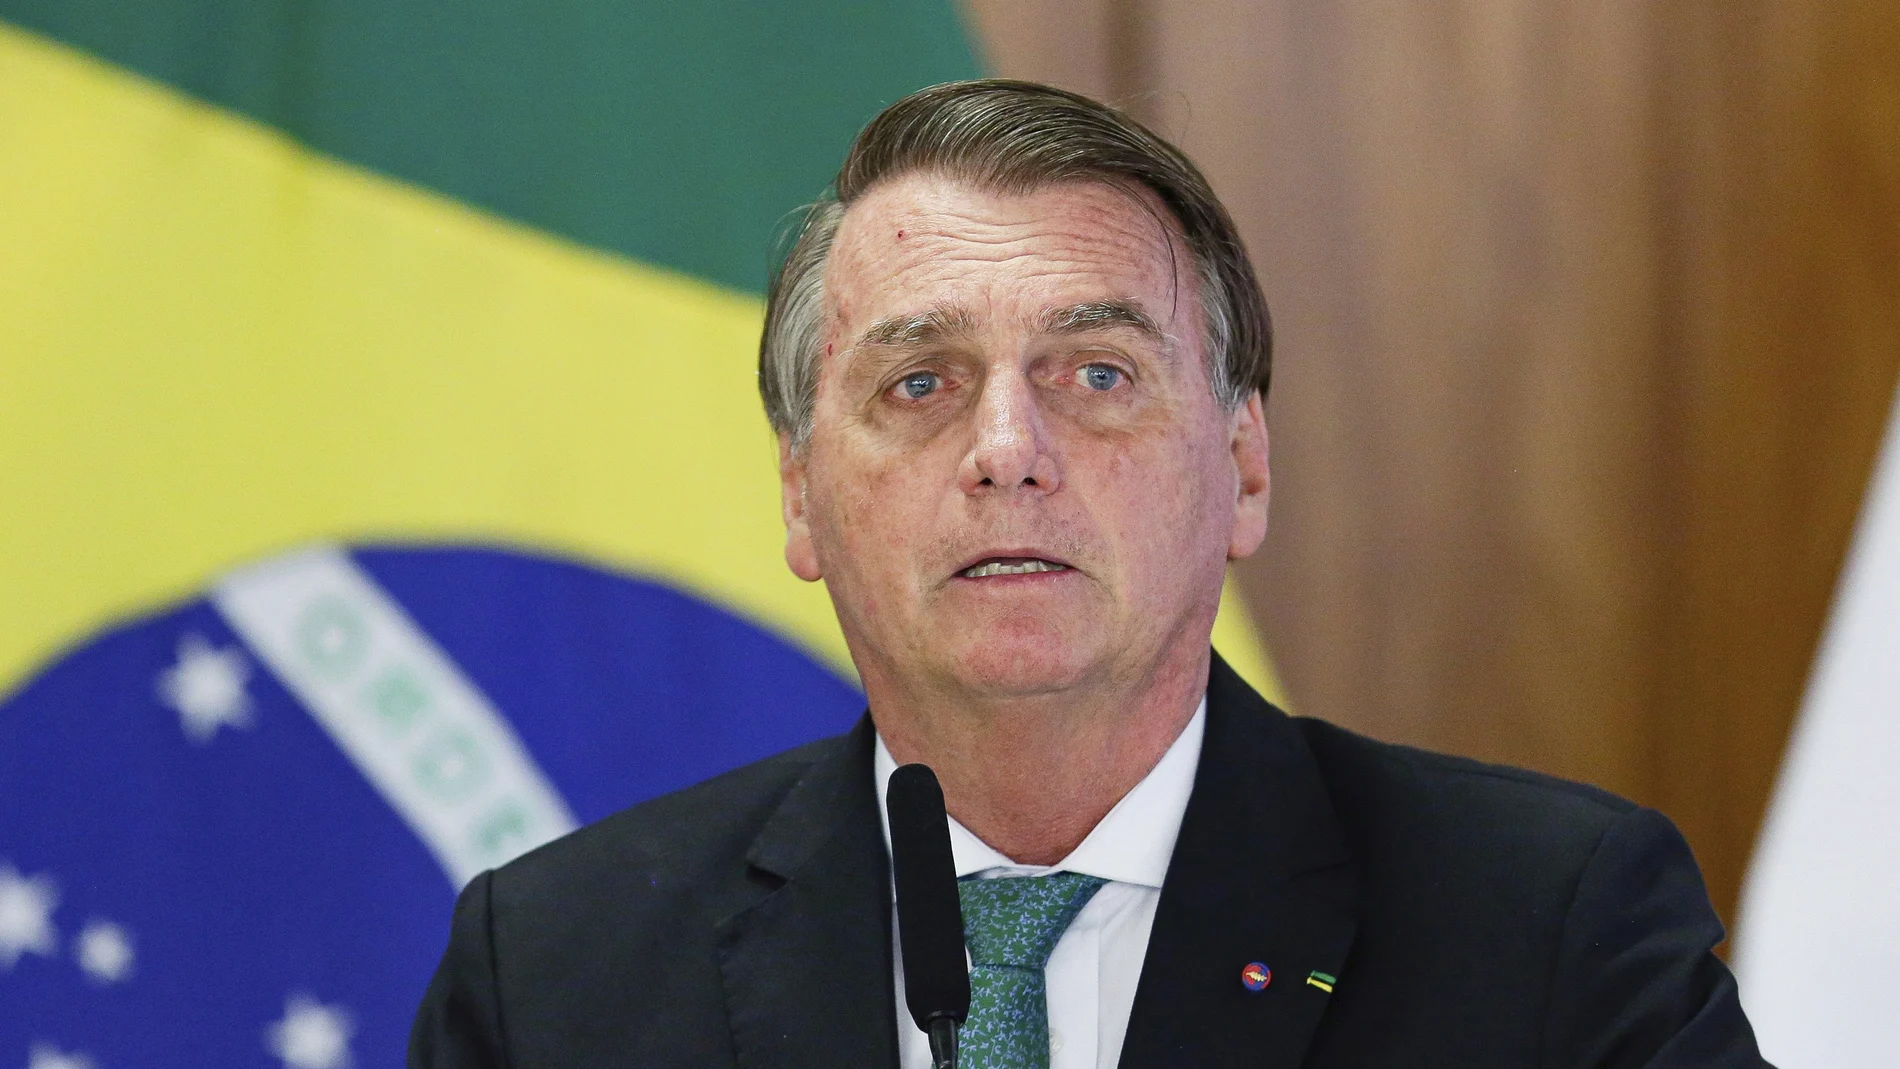 FILE - Brazil's President Jair Bolsonaro speaks during a joint press conference Paraguay's president at the Planalto Palace in Brasilia, Brazil, Nov. 24, 2021. Bolsonaro was taken to a Sao Paulo hospital early Monday, Jan. 3, 2022, with a suspected intestinal obstruction, the countryâ€™s media reported. (AP Photo/Raul Spinasse, File)